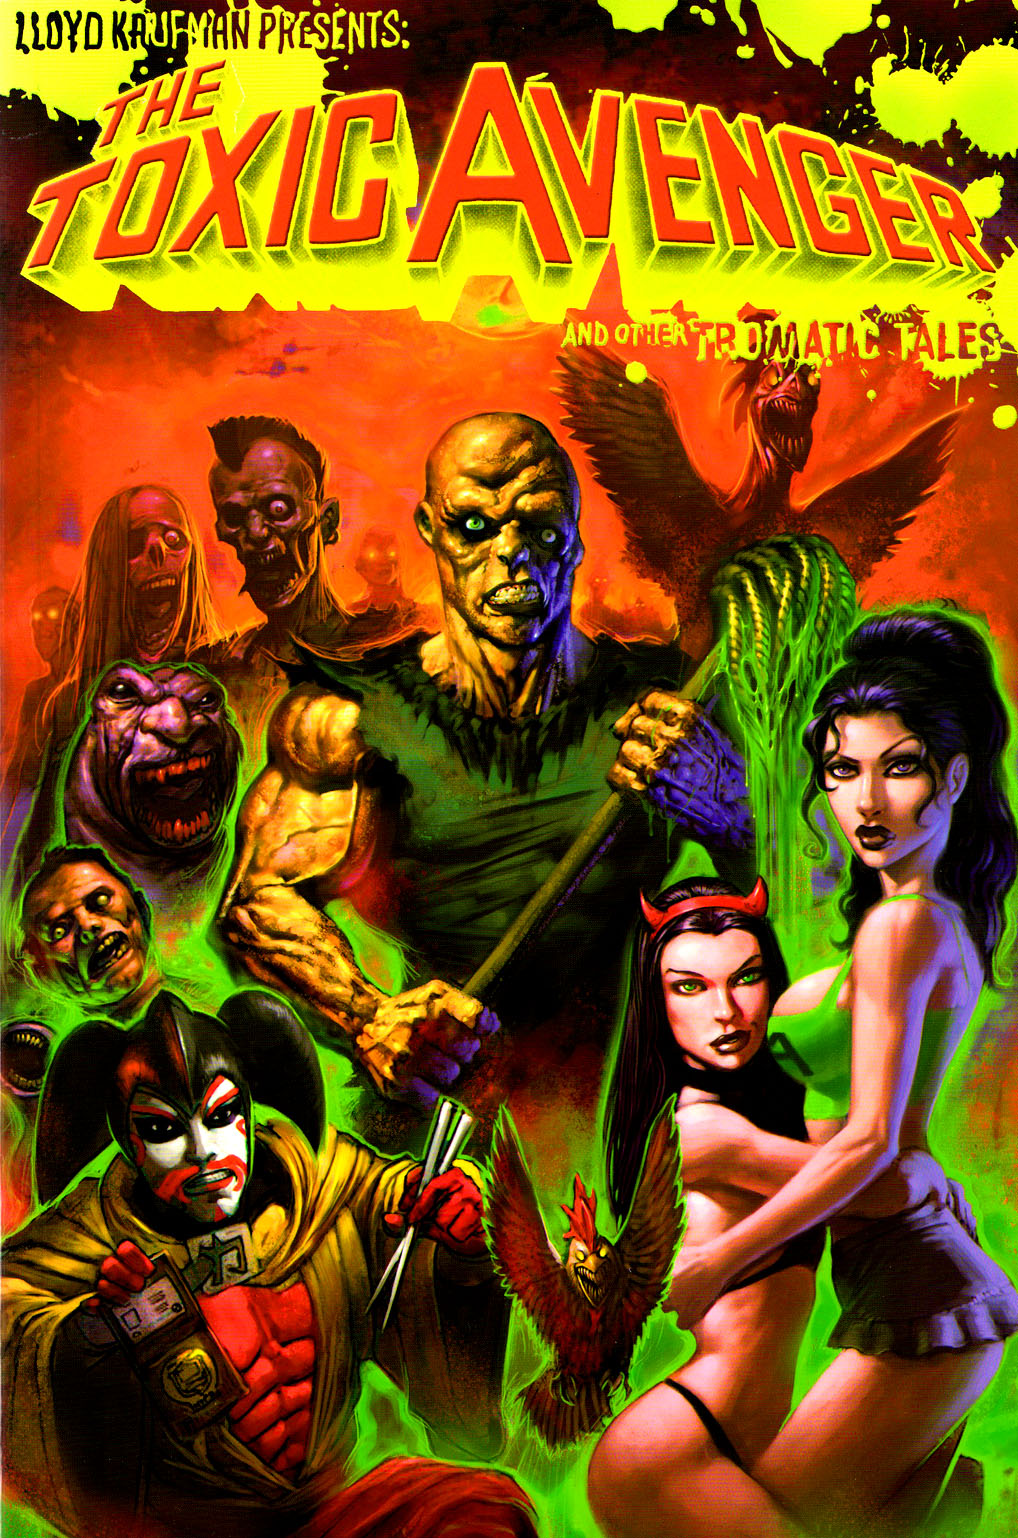 Read online Lloyd Kaufman Presents: The Toxic Avenger and Other Tromatic Tales comic -  Issue # TPB (Part 1) - 1